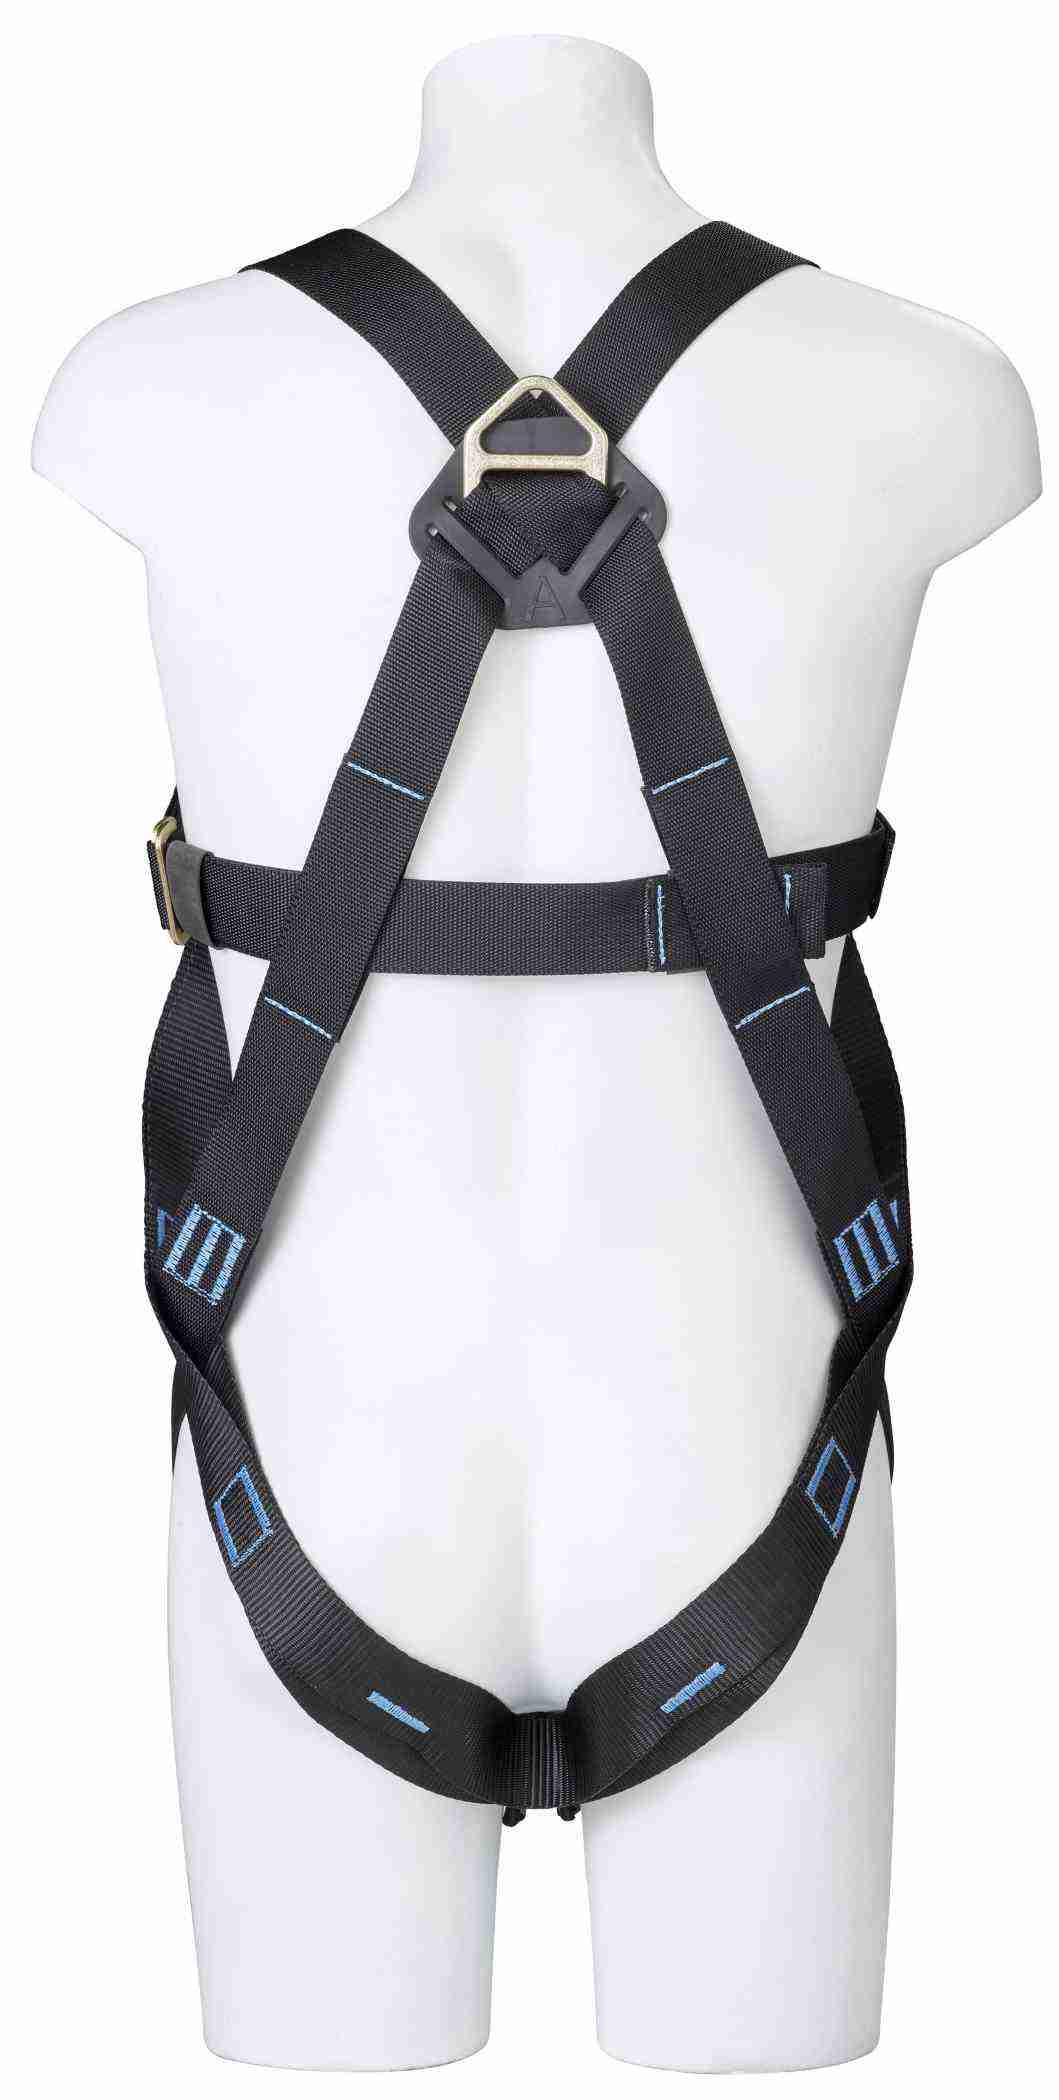 P+P Safety FRS MK2 Fall Arrest Harness 90099MK2 - SecureHeights